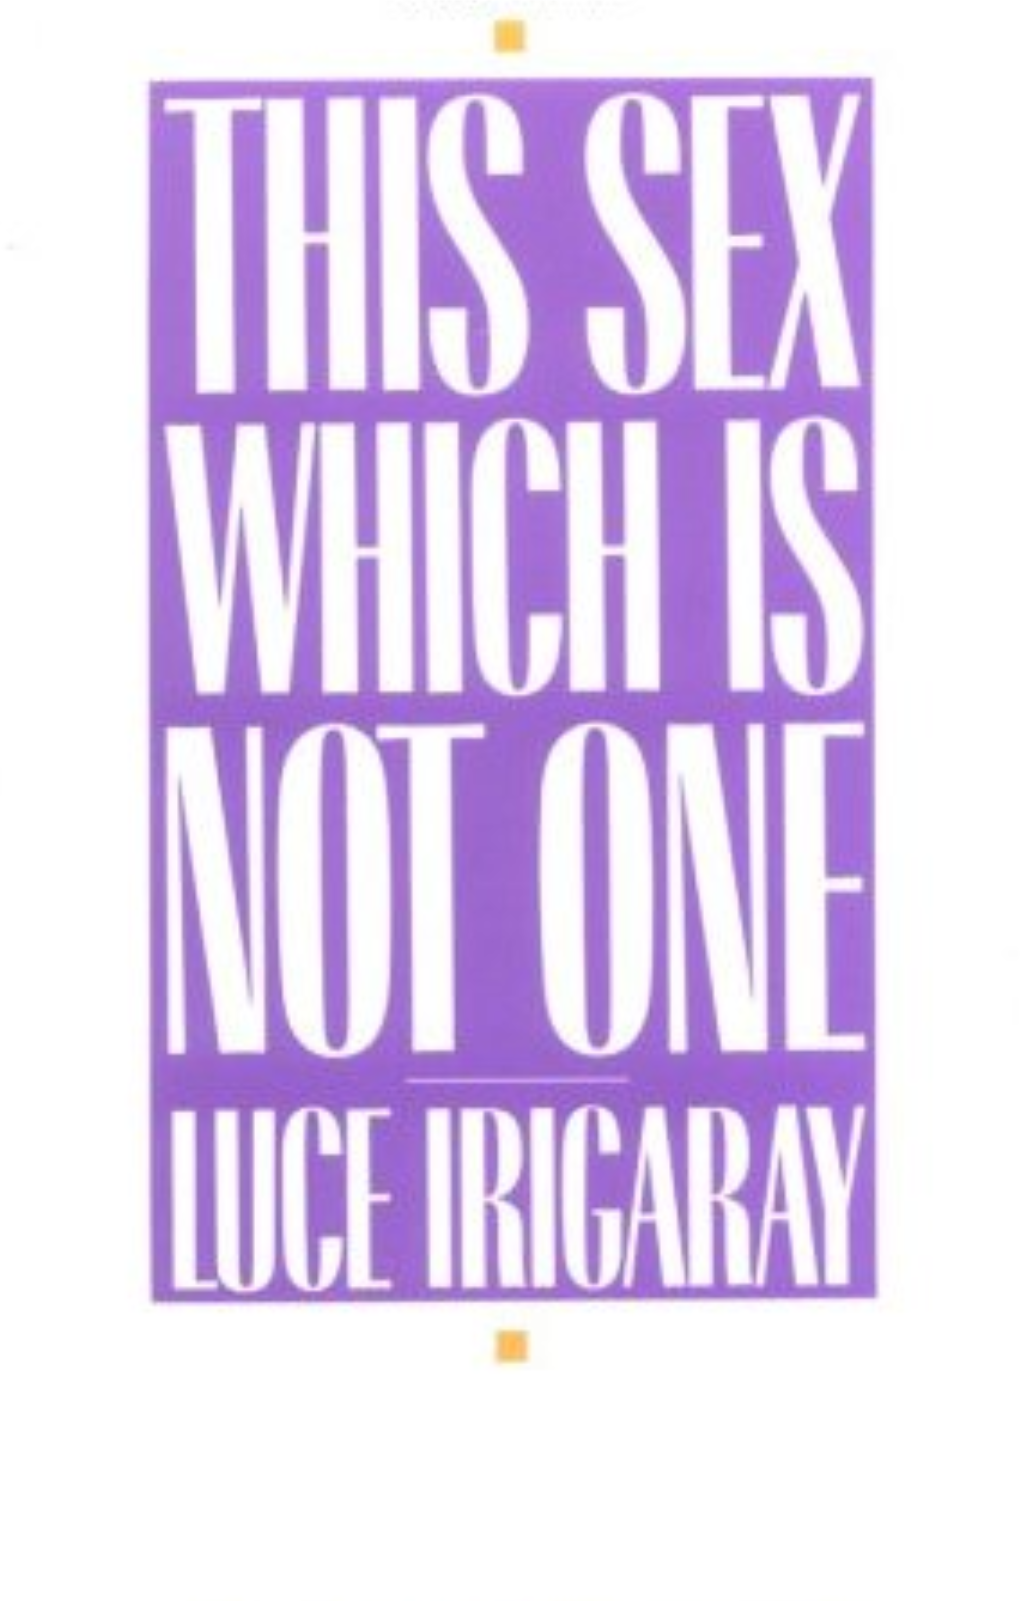 Luce Irigaray's "This Sex Which Is Not One"